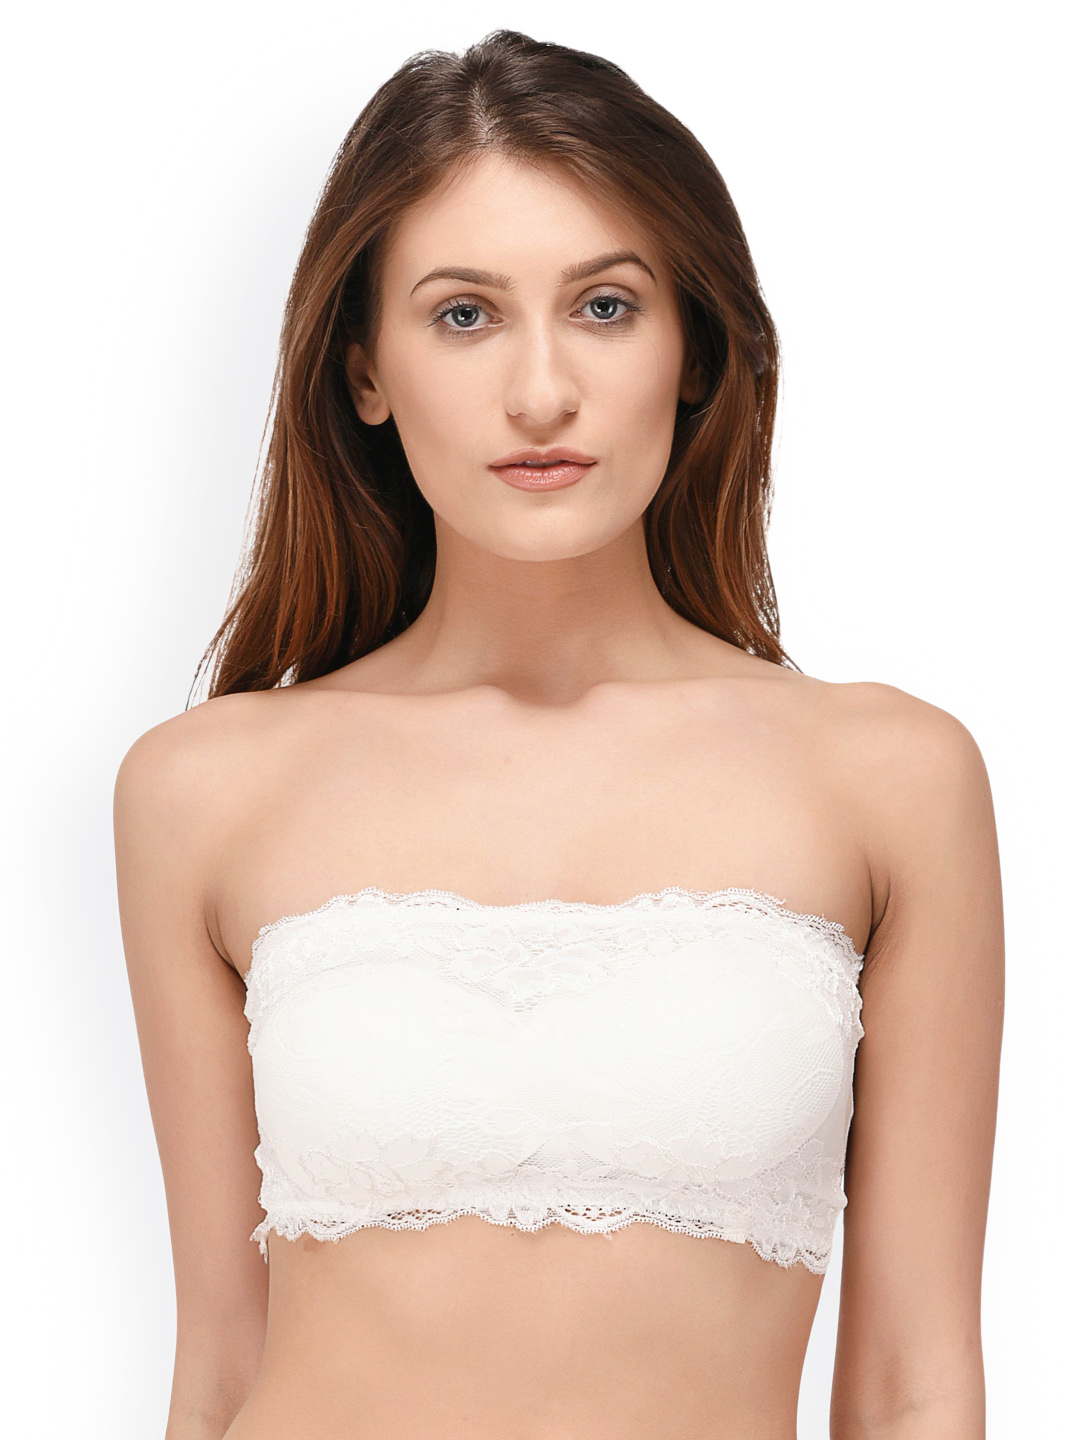 PrettyCat White Lace Non-Wired Lightly Padded Bralette Bra Price in India